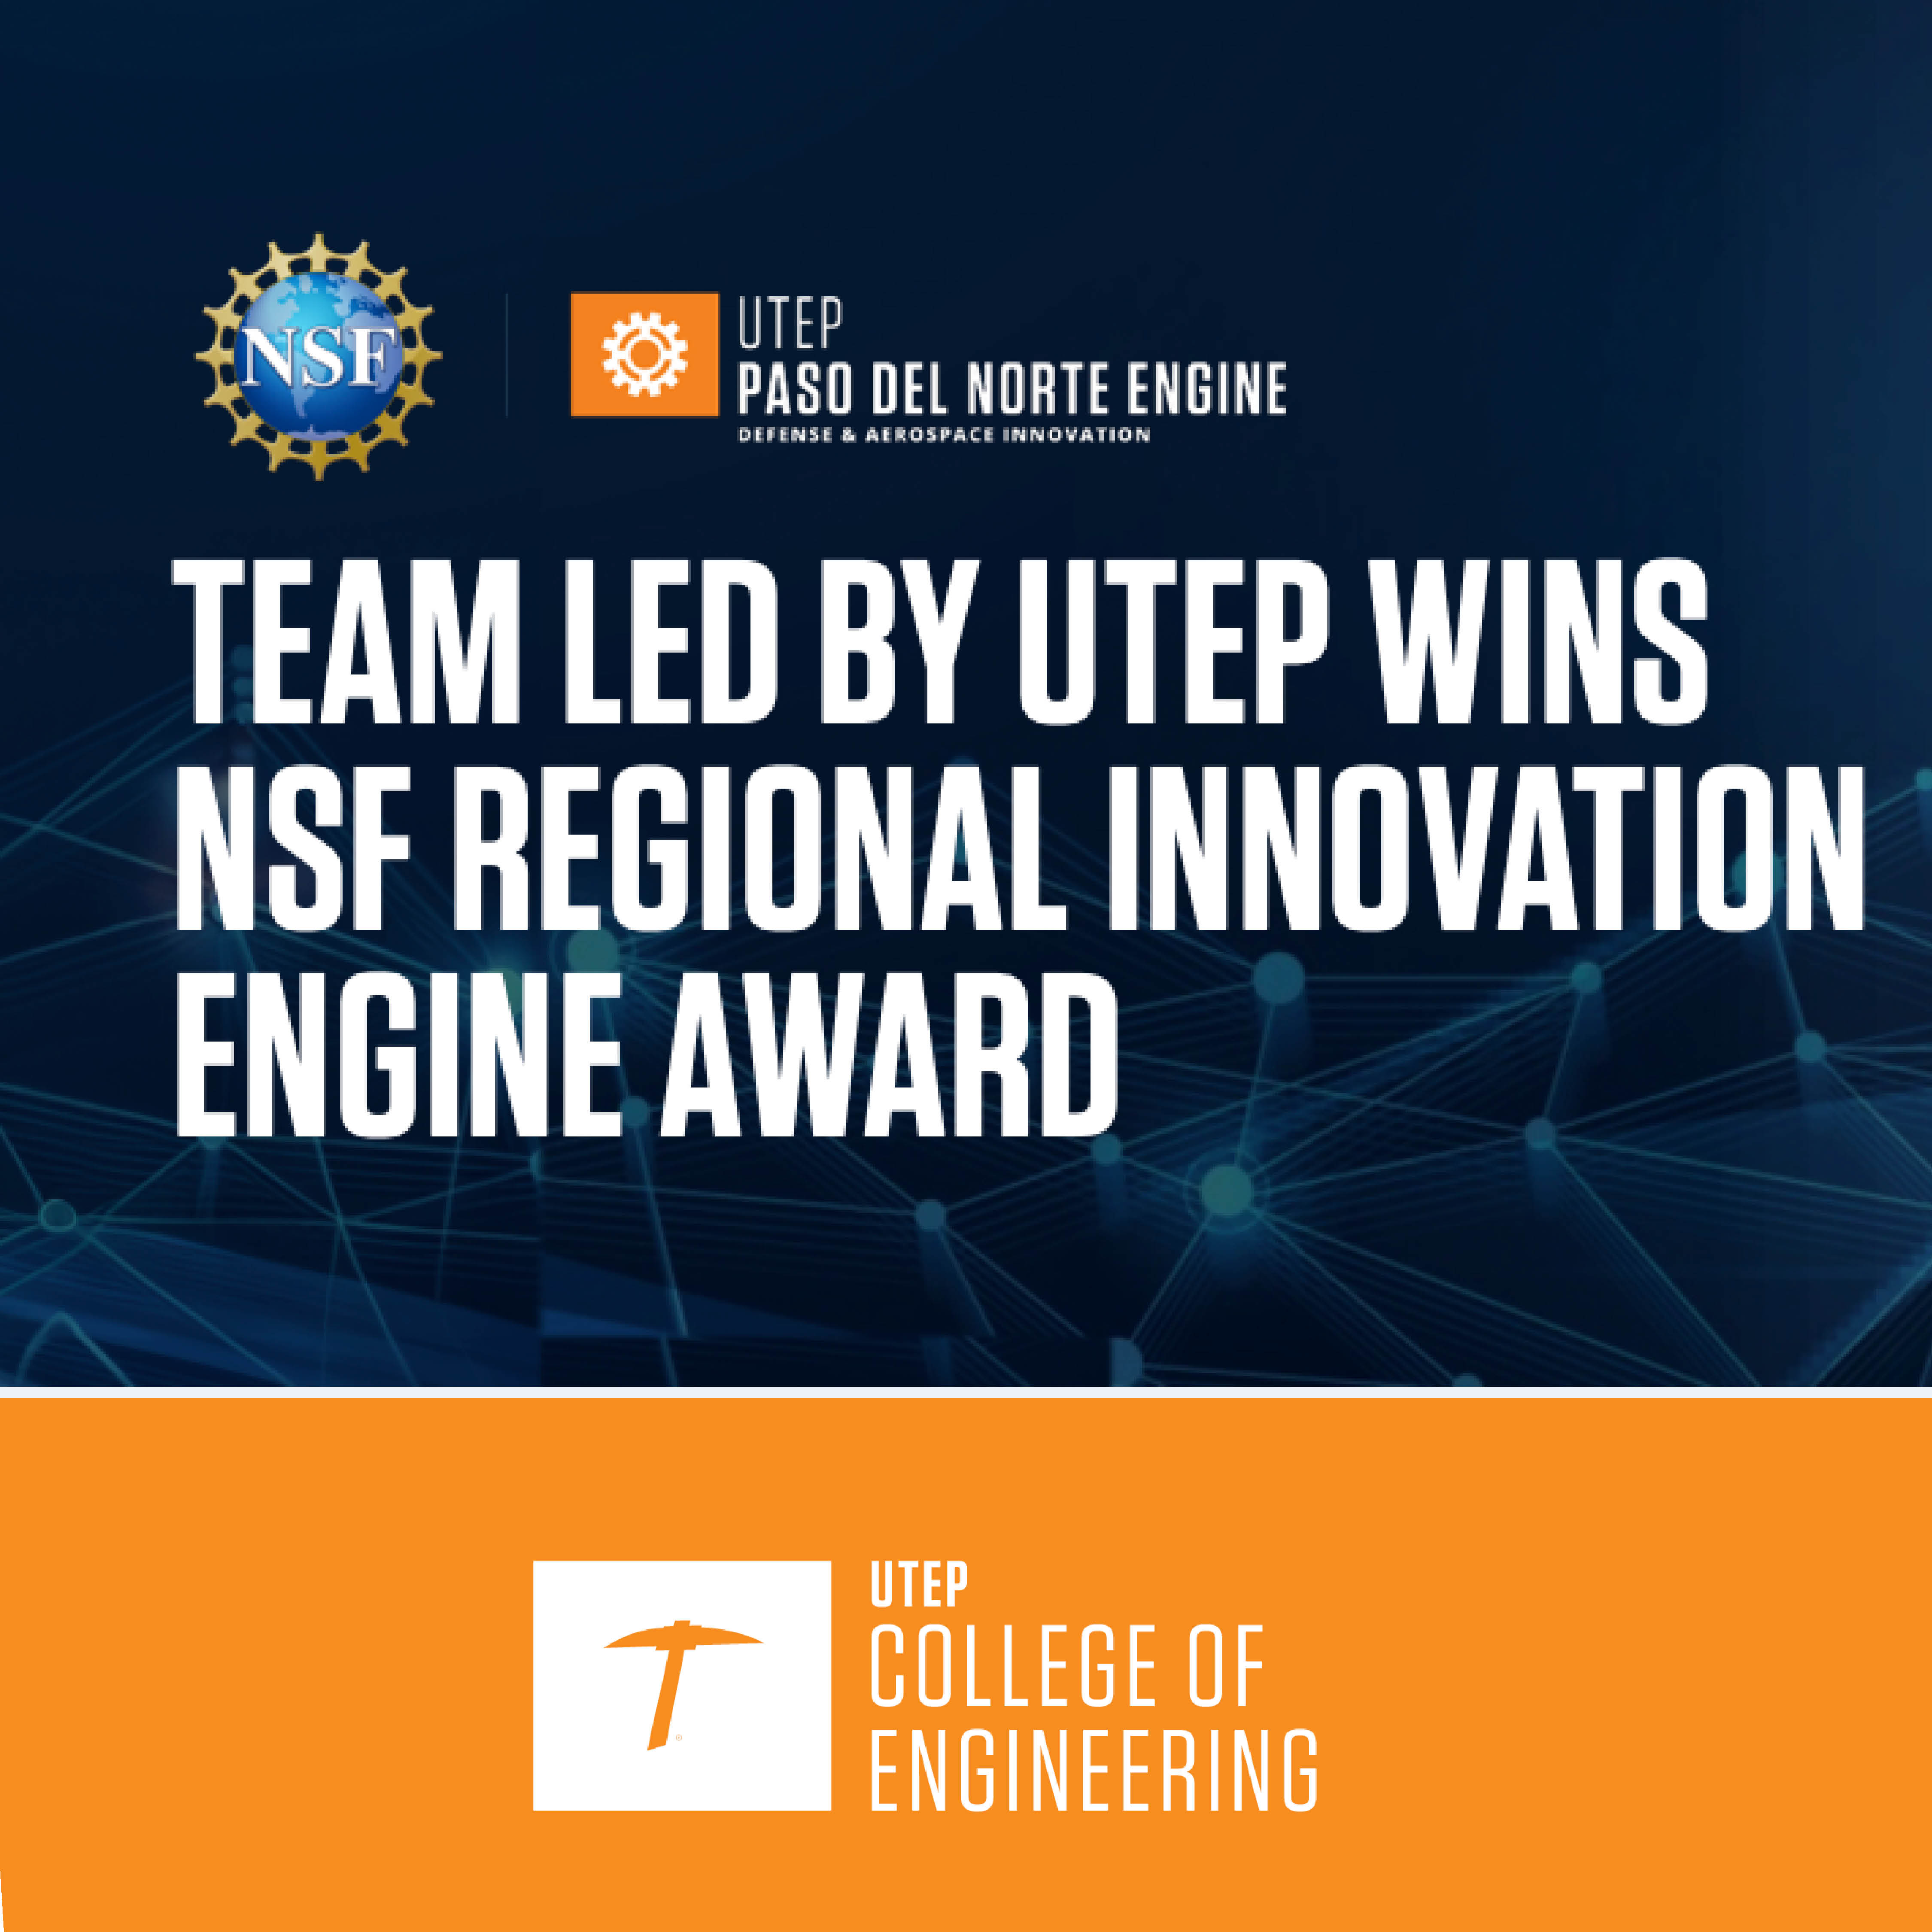 UTEP Wins Inaugural NSF Regional Innovation Engines Award for up to 15M Over Two Years